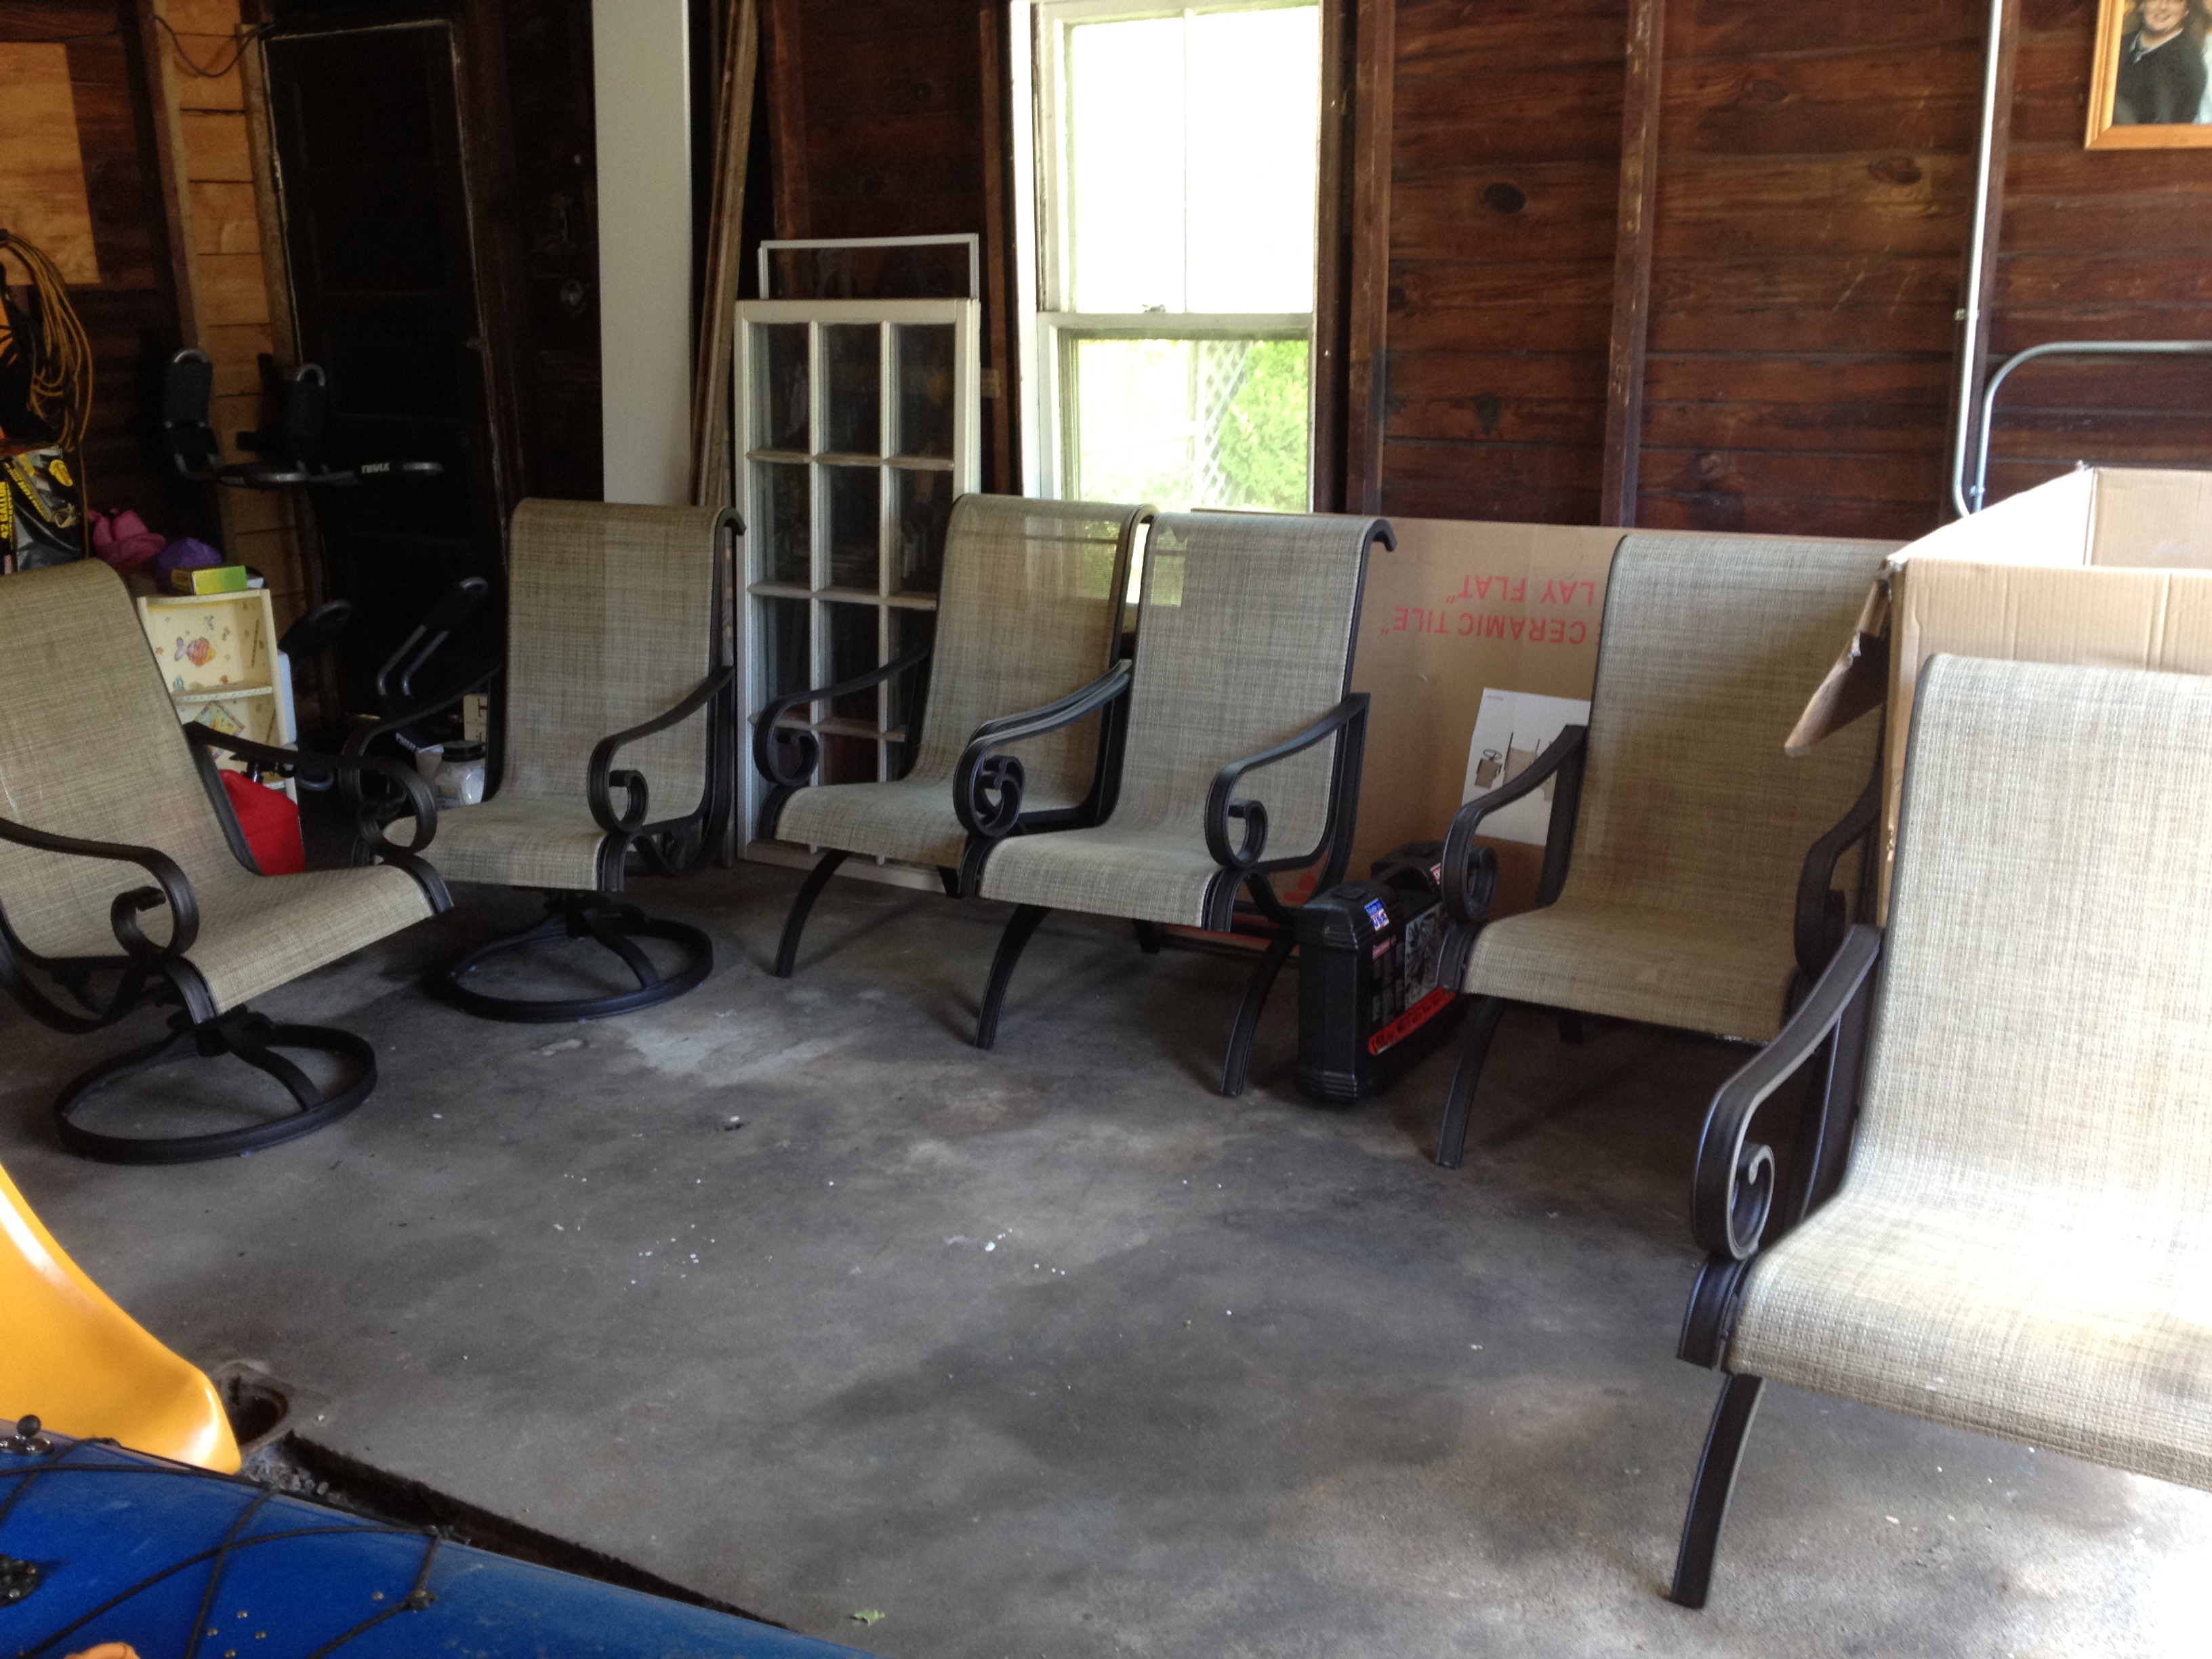 All the Chairs are done